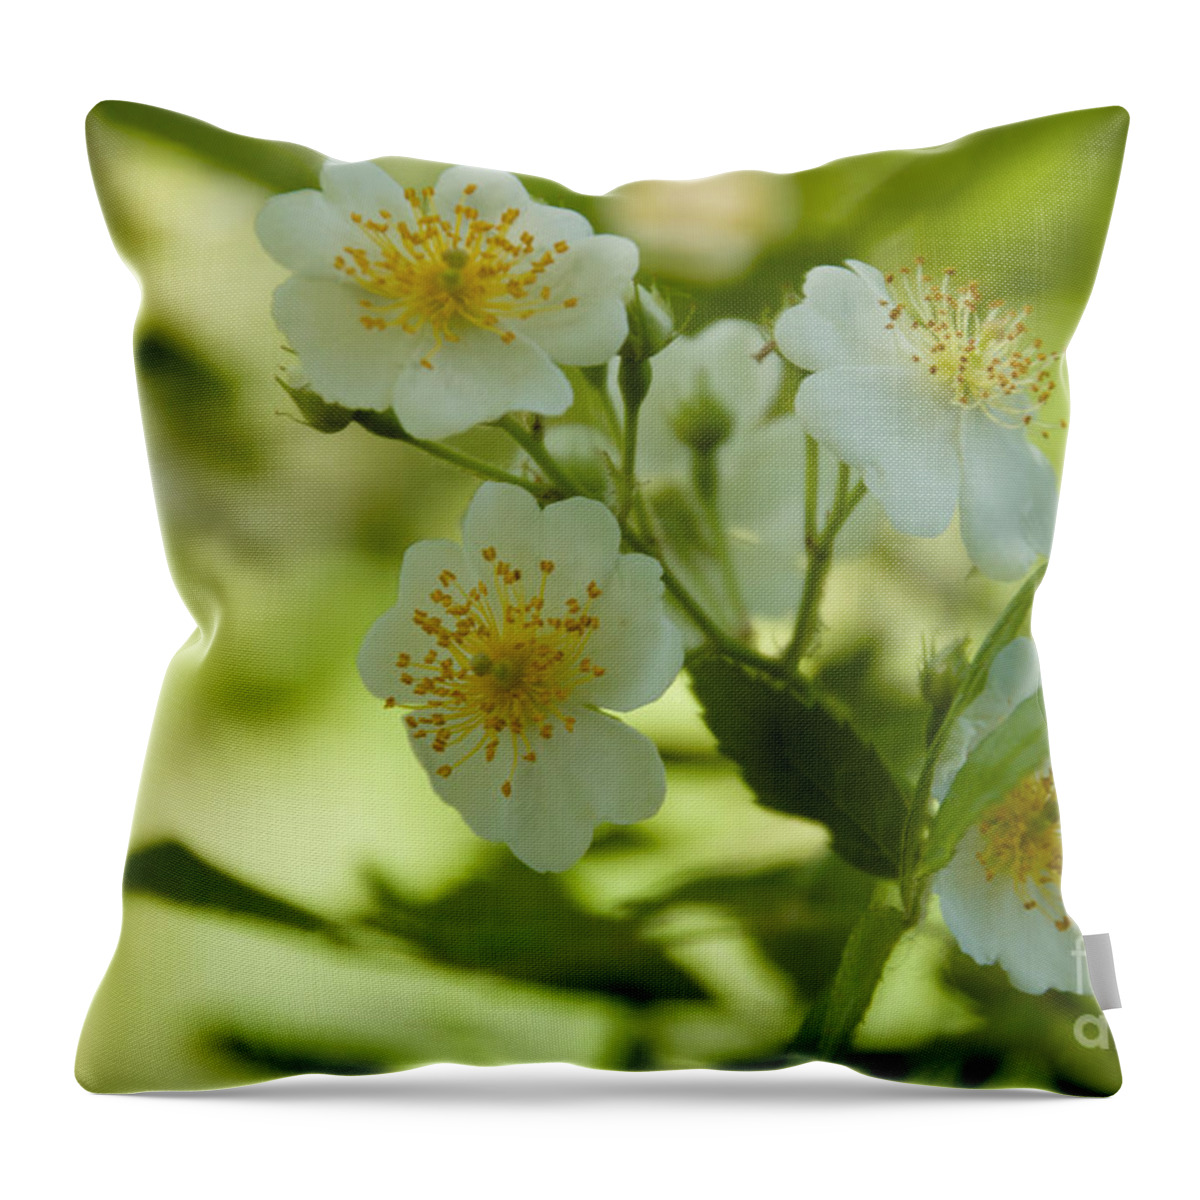 White Throw Pillow featuring the photograph Summer Flower by William Norton